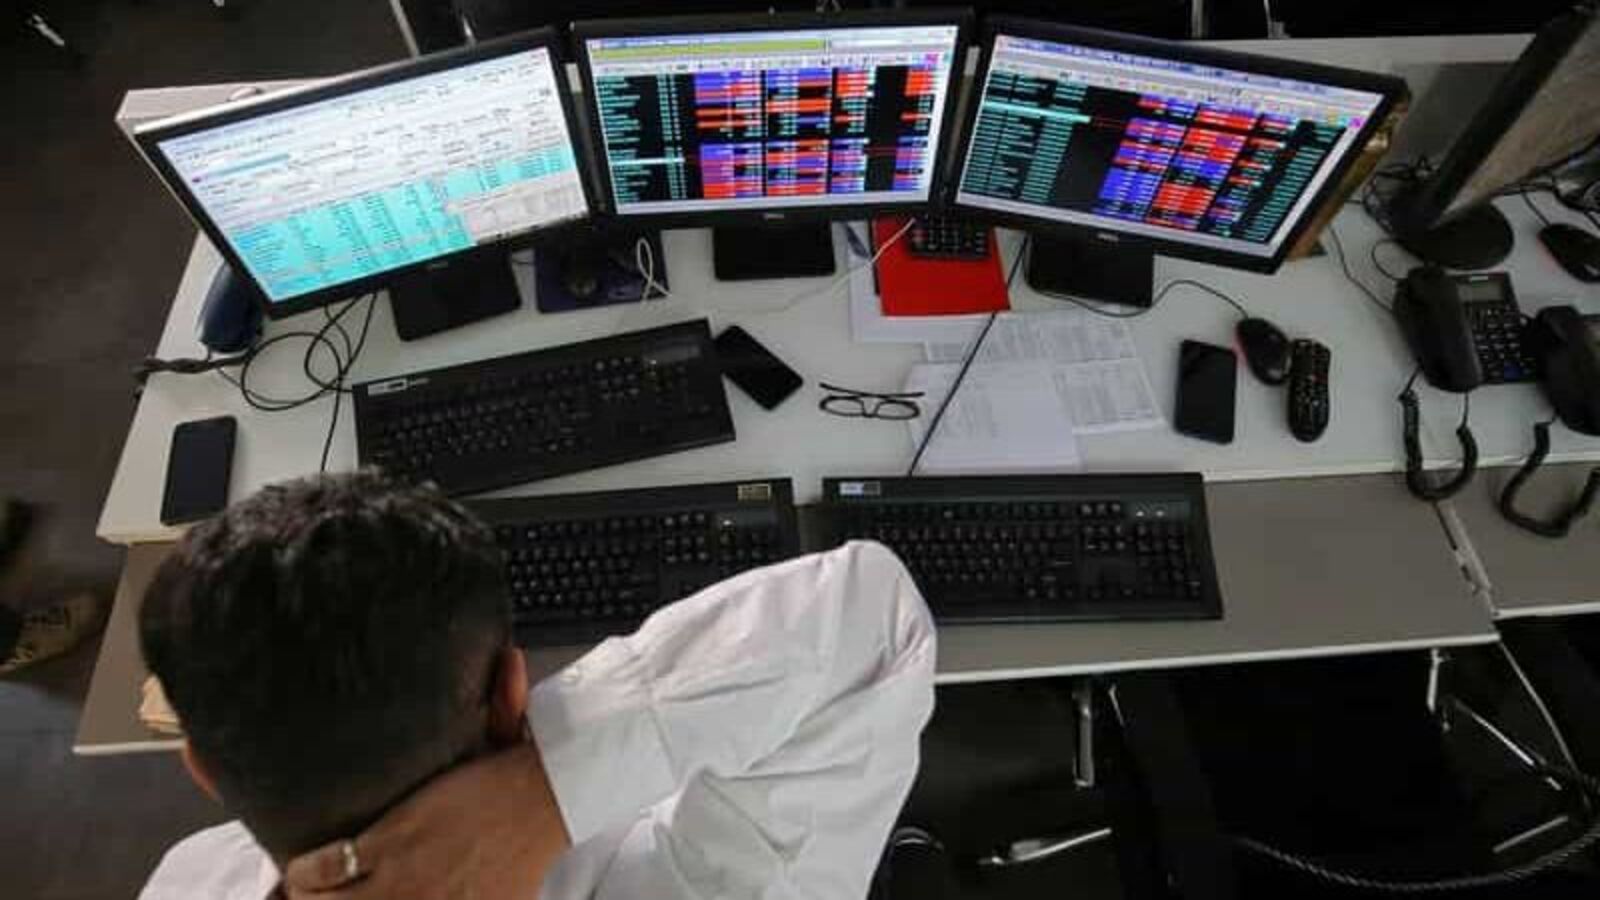 Nifty 50 expected to rise 14% to reach 25,810 level by December, says Prabhudas; picks 7 large cap stocks to buy